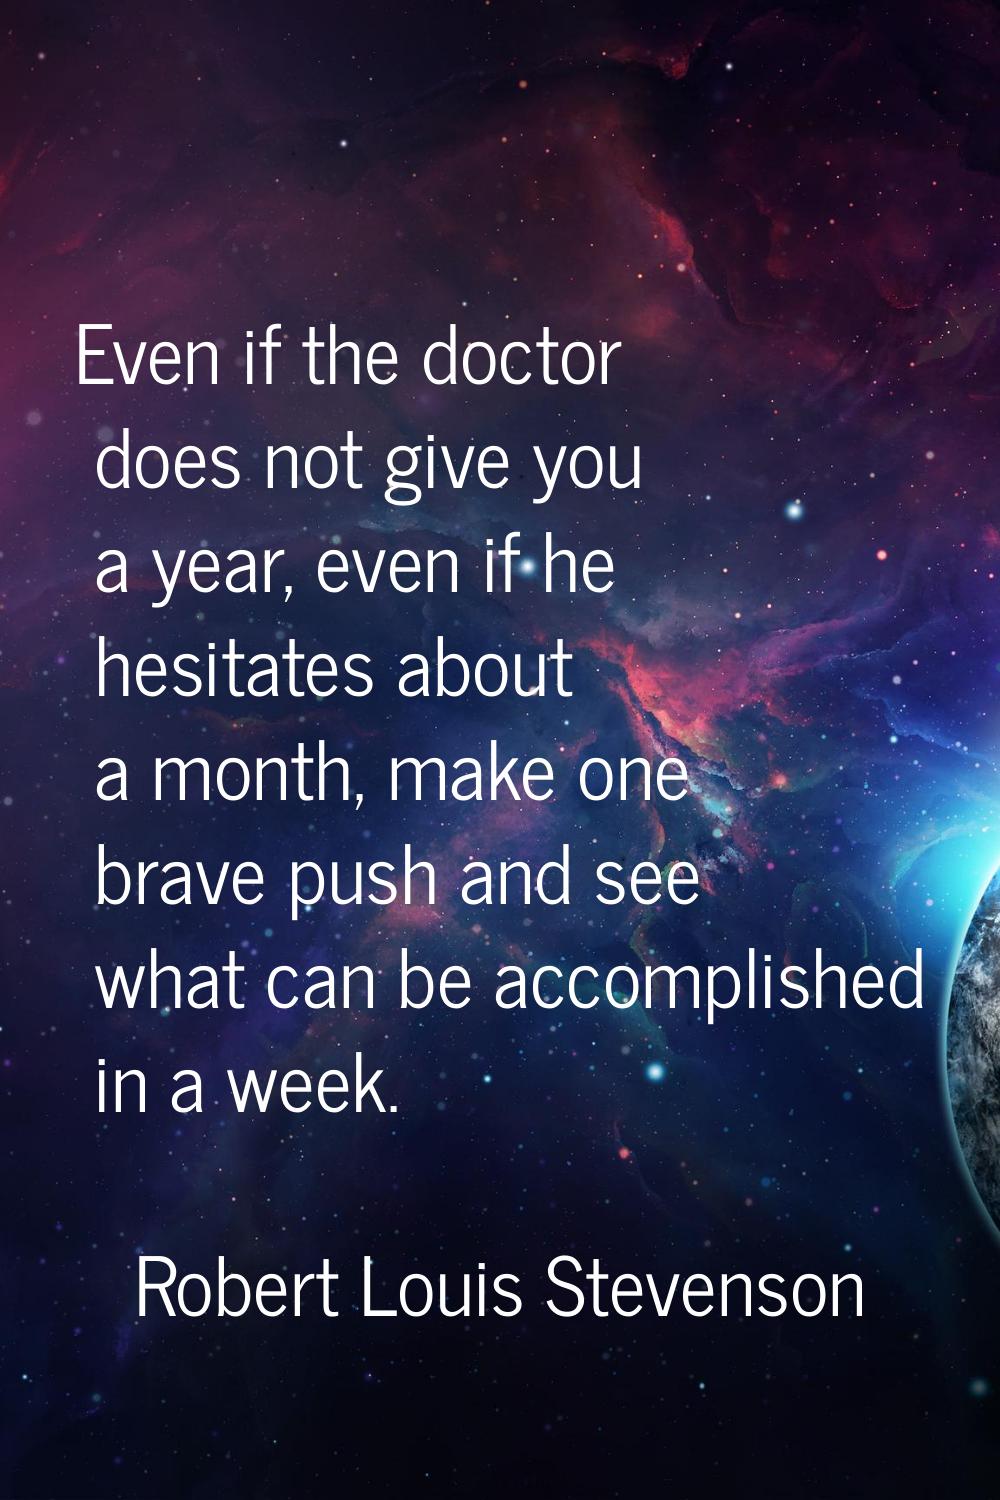 Even if the doctor does not give you a year, even if he hesitates about a month, make one brave pus